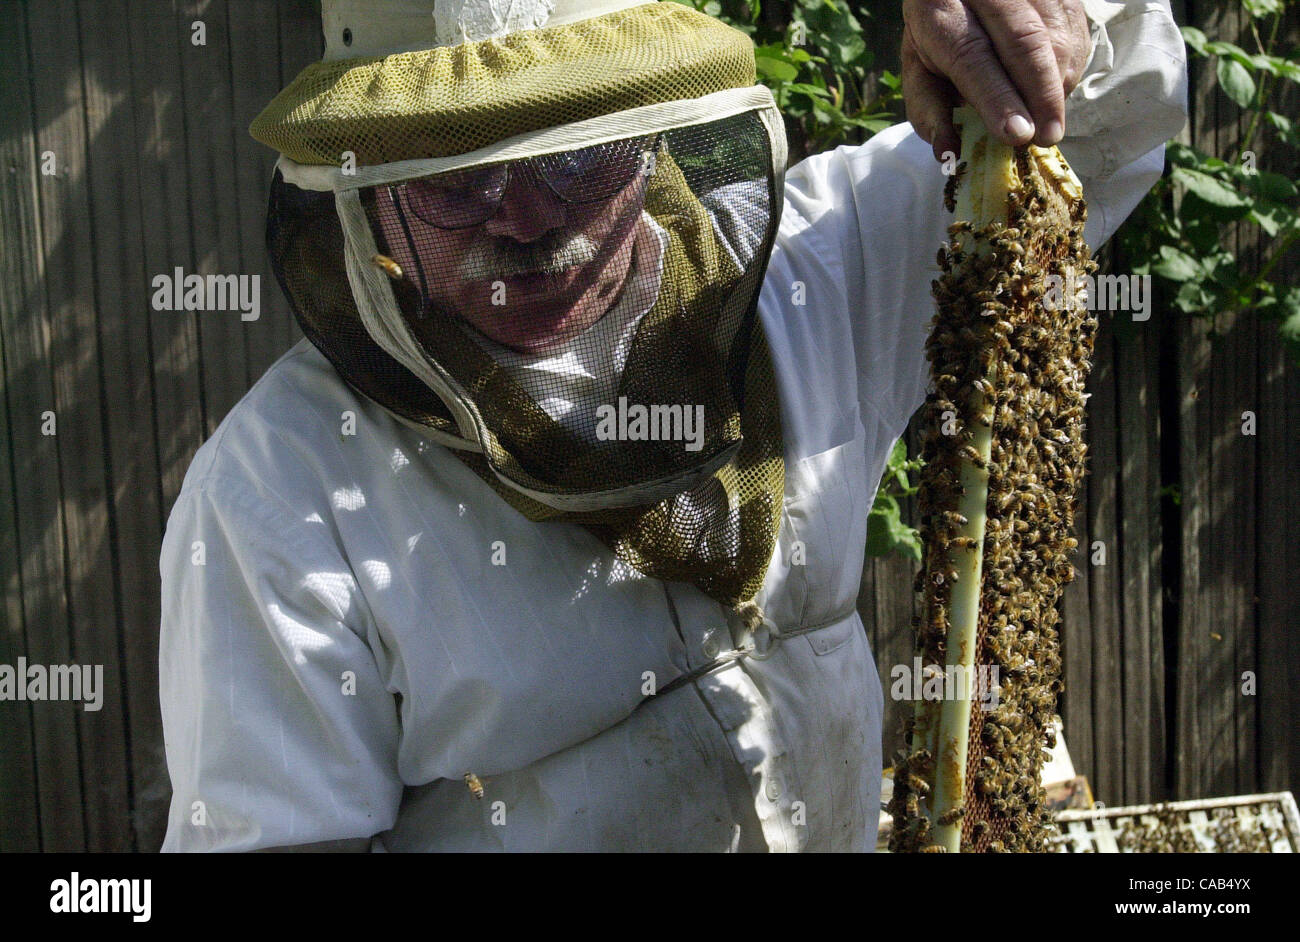 Mt. Diablo Beekeepers Association Vice President, Major Branzel, examines a panel of bees during a Spring work day for members only in Pleasant Hill, Calif. on Saturday, April 17, 2004.  (CONTRA COSTA NEWSPAPERS/Tue Nam Ton) Stock Photo